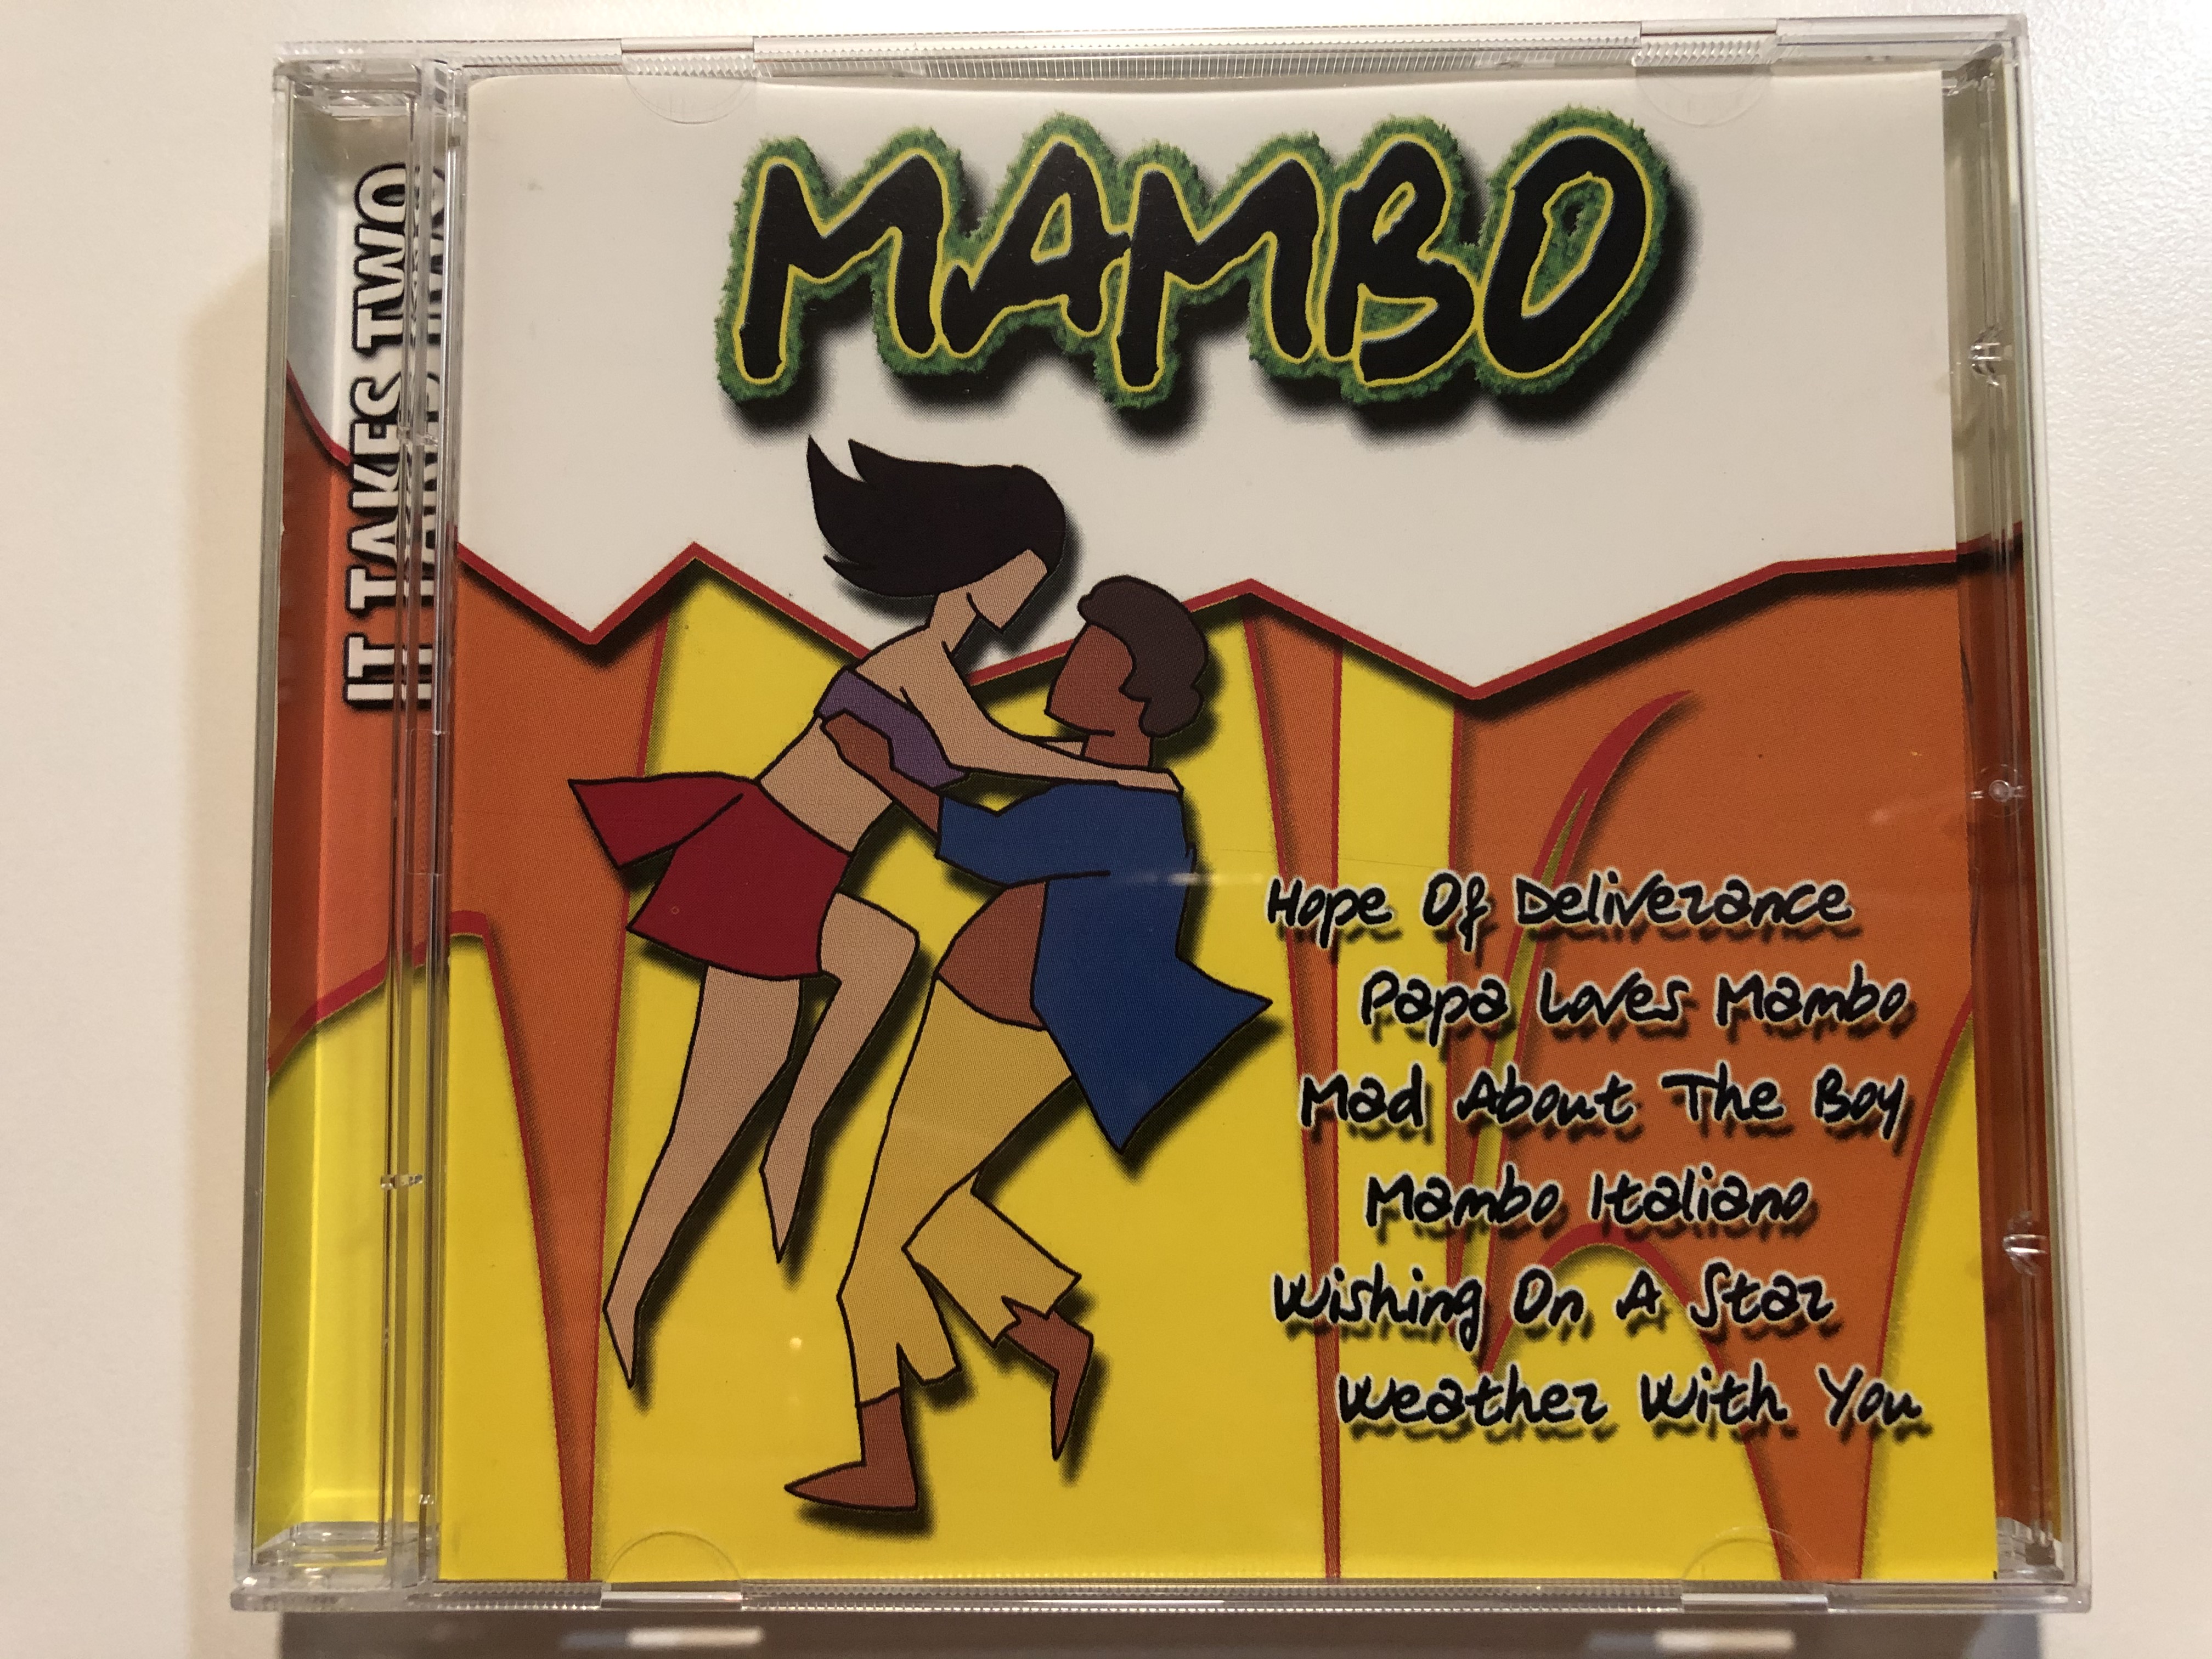 mambo-hope-of-deliverance-pappa-loves-mambo-mad-about-the-boy-mambo-italiano.-wishing-on-a-star-weather-with-you-it-takes-two-audio-cd-2000-itt010-1-.jpg